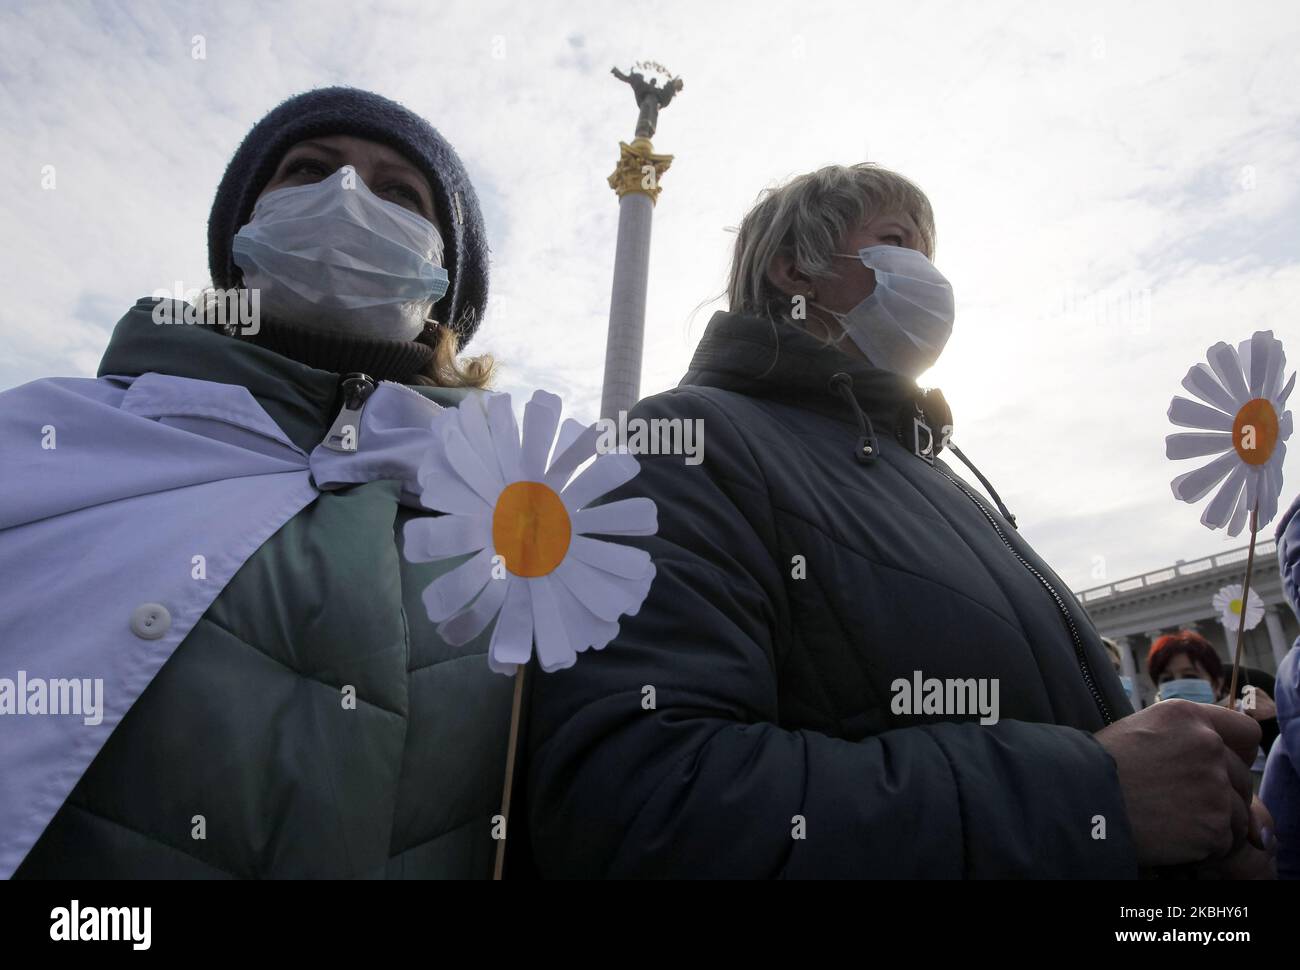 Ukrainian medical workers wearing face masks participate at a rally against health reform, on the Independence Square in Kyiv, Ukraine, on 26 February, 2020. Ukrainian nurses, doctors and other healthcare workers held their rally with demand better wages and working conditions, and against closing of medical facilities, according to local media. (Photo by STR/NurPhoto) Stock Photo